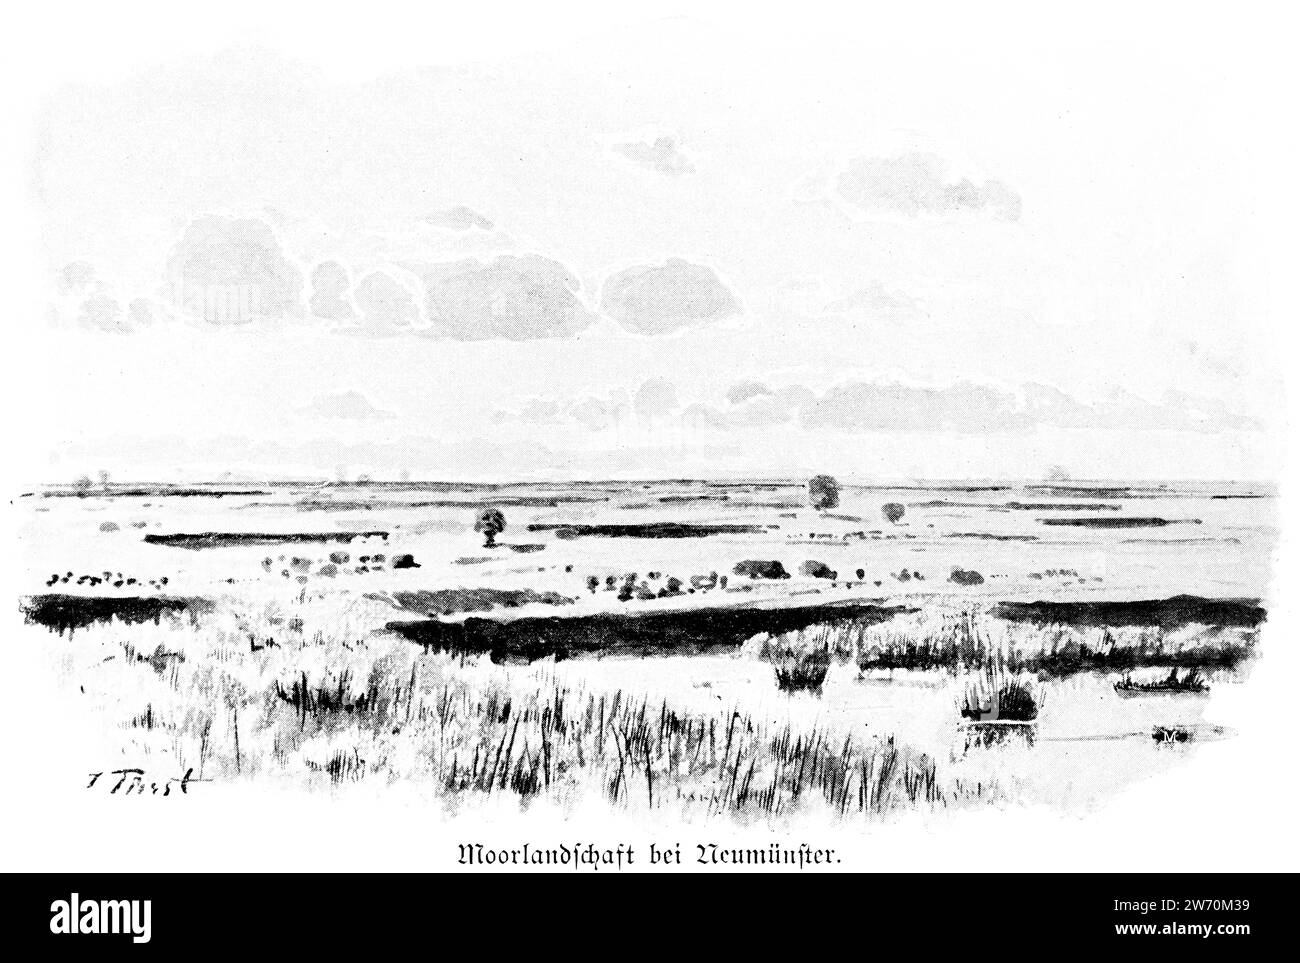 Moor near the town of Neumünster, Schleswig-Holstein, Northern Germany, Central Europe Stock Photo